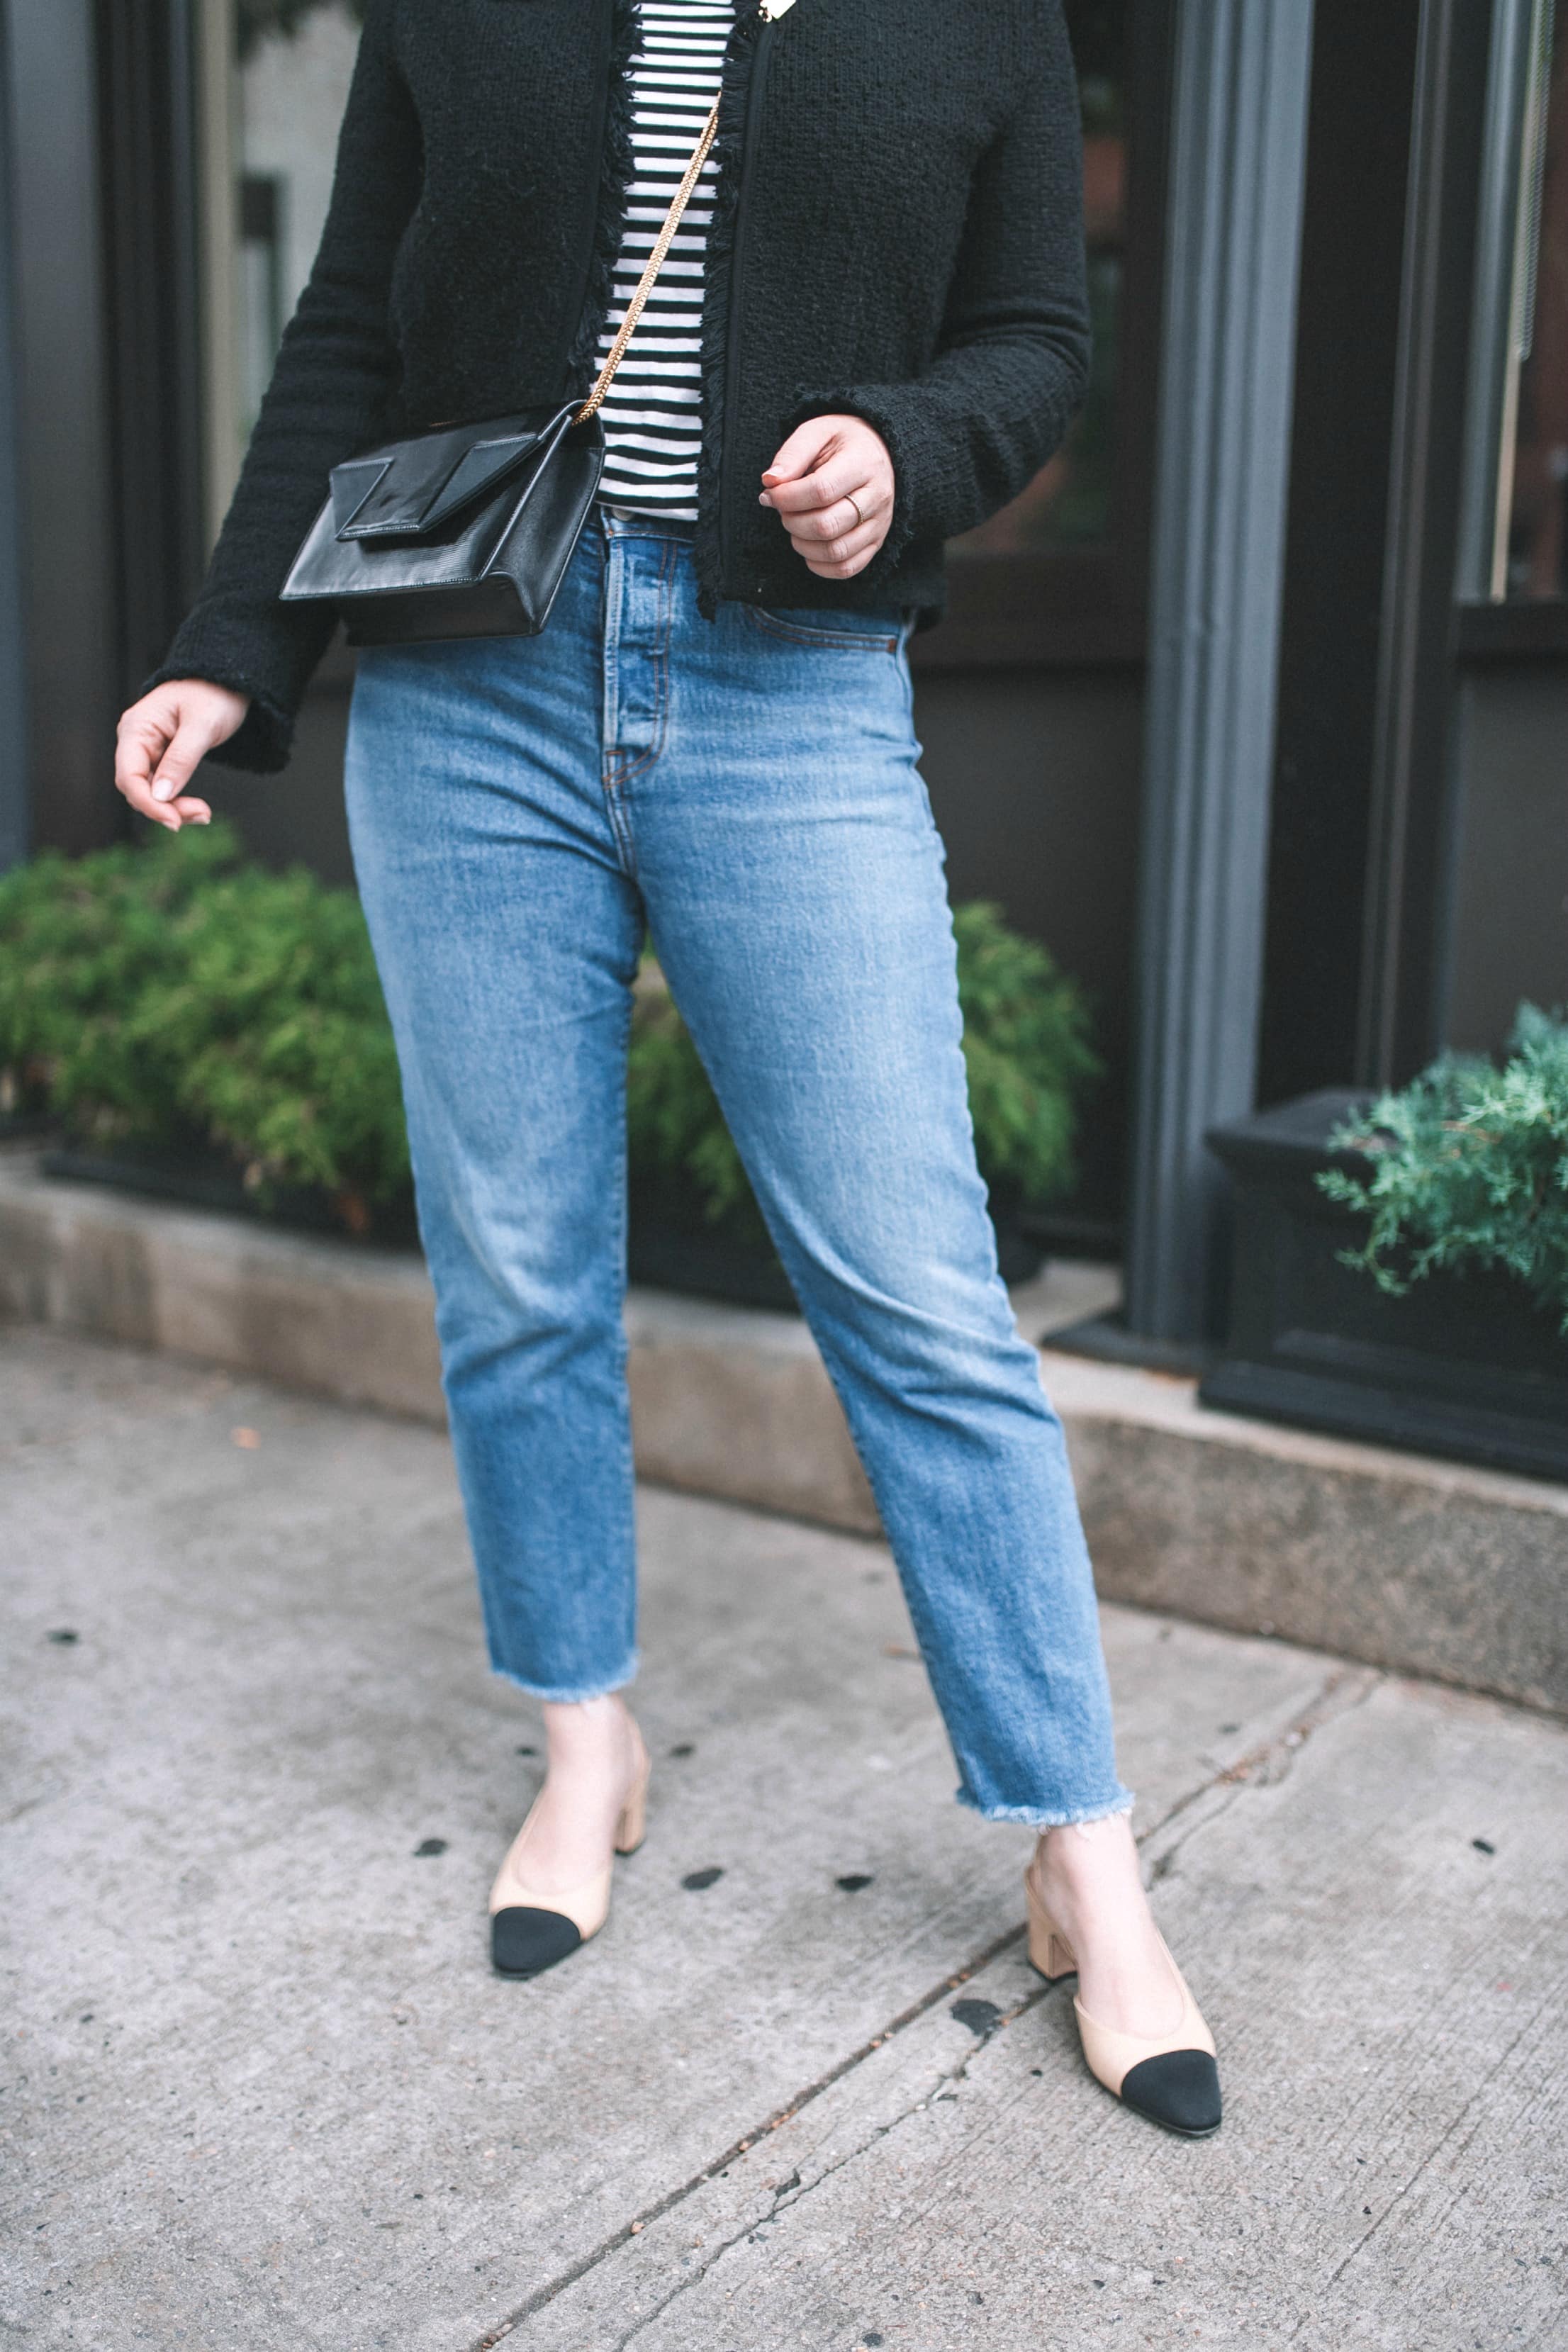 French Inspired Fall Capsule Wardrobe I Things I Own That Are Currently On Sale